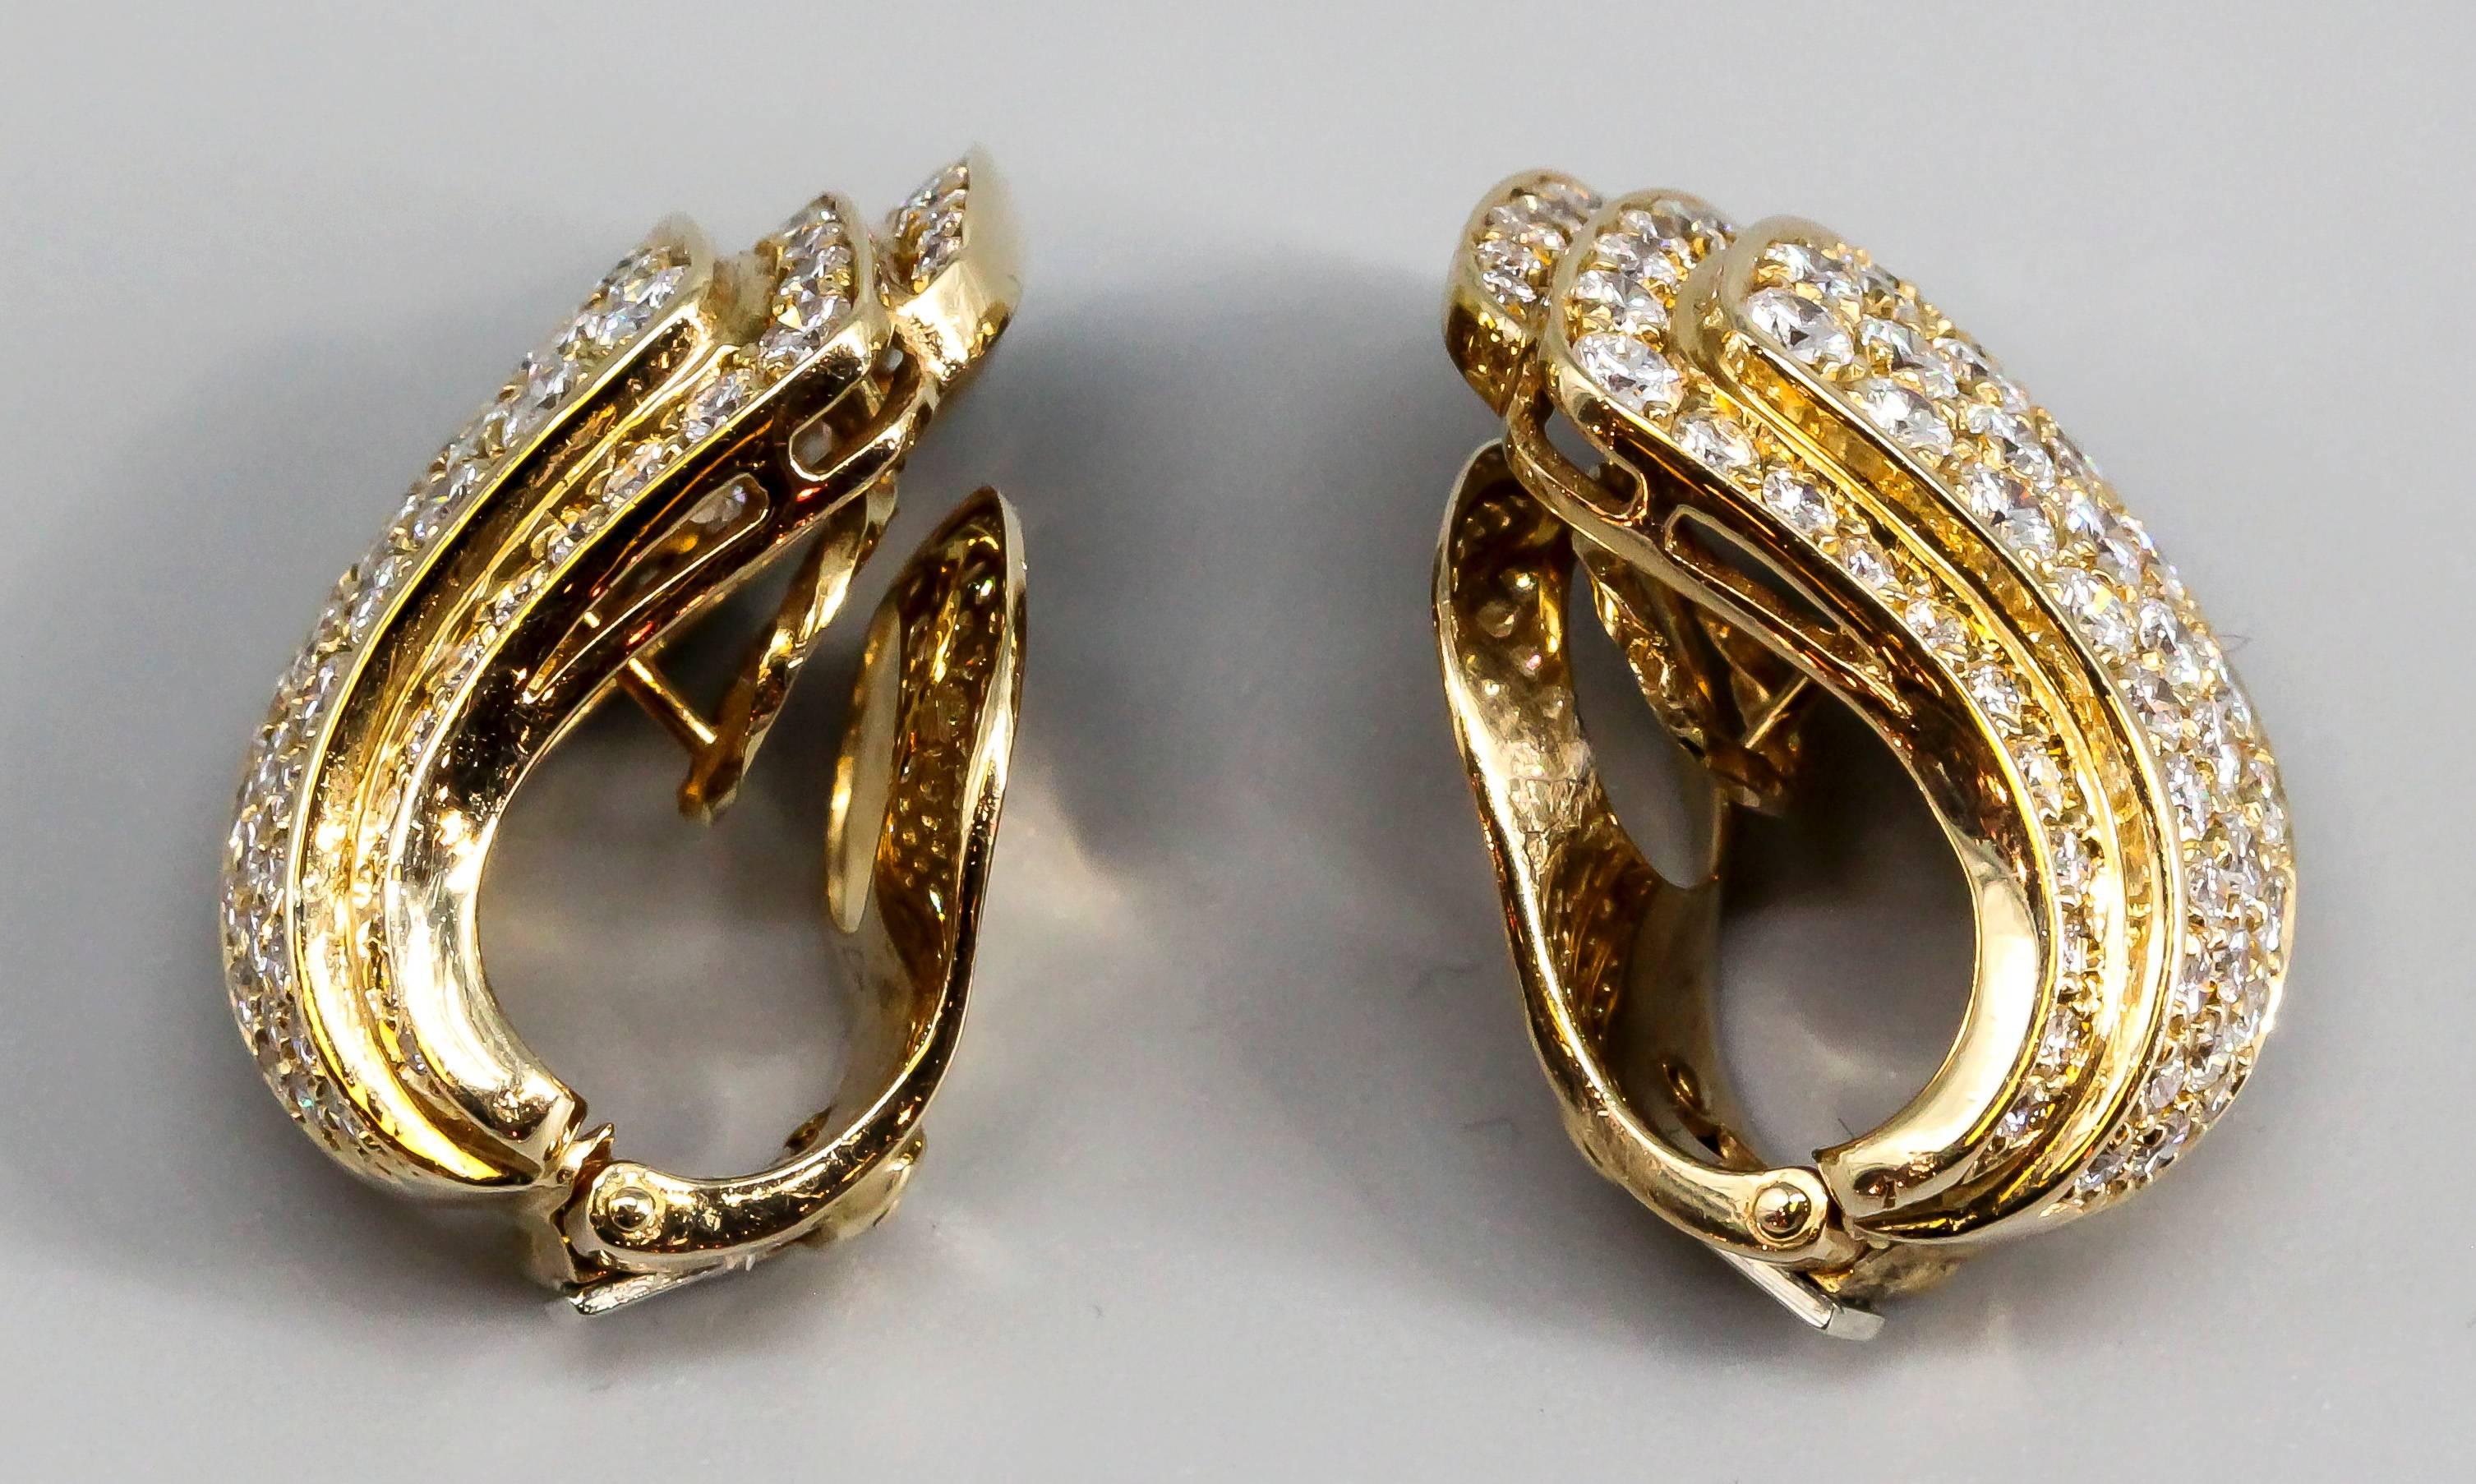 Elegant diamond and 18K yellow gold ear clips by Van Cleef & Arpels, circa 1960s-70s. They feature very high grade round brilliant cut diamonds, approx. 5.0 carats total weight. Excellent workmanship and a novel design.

Hallmarks: VCA, reference